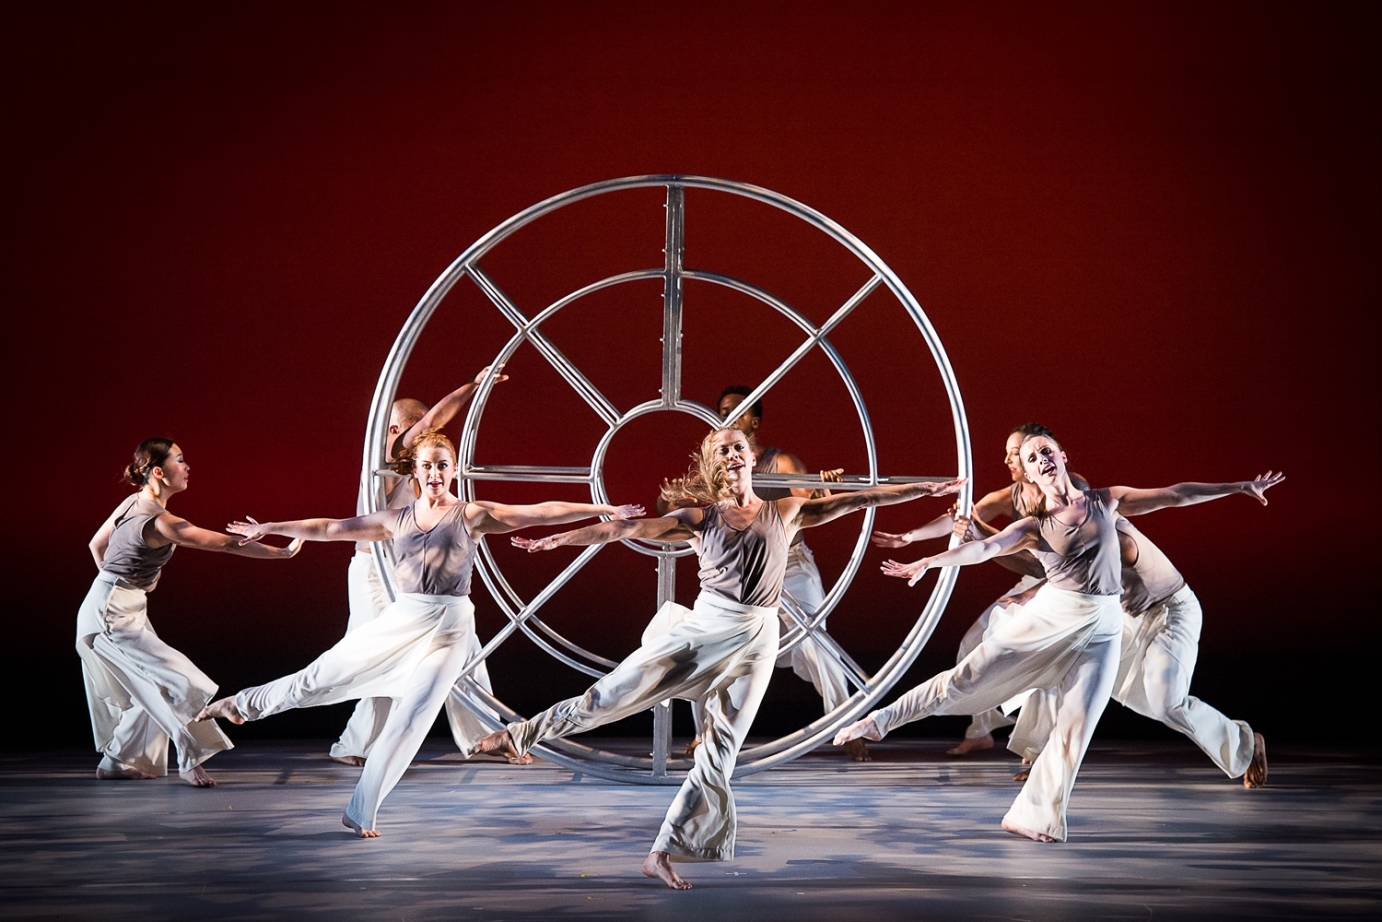 a company of dancers in white and grey maniputlate a gigantic silver wheel while three of their peers joyfully dance in front of them